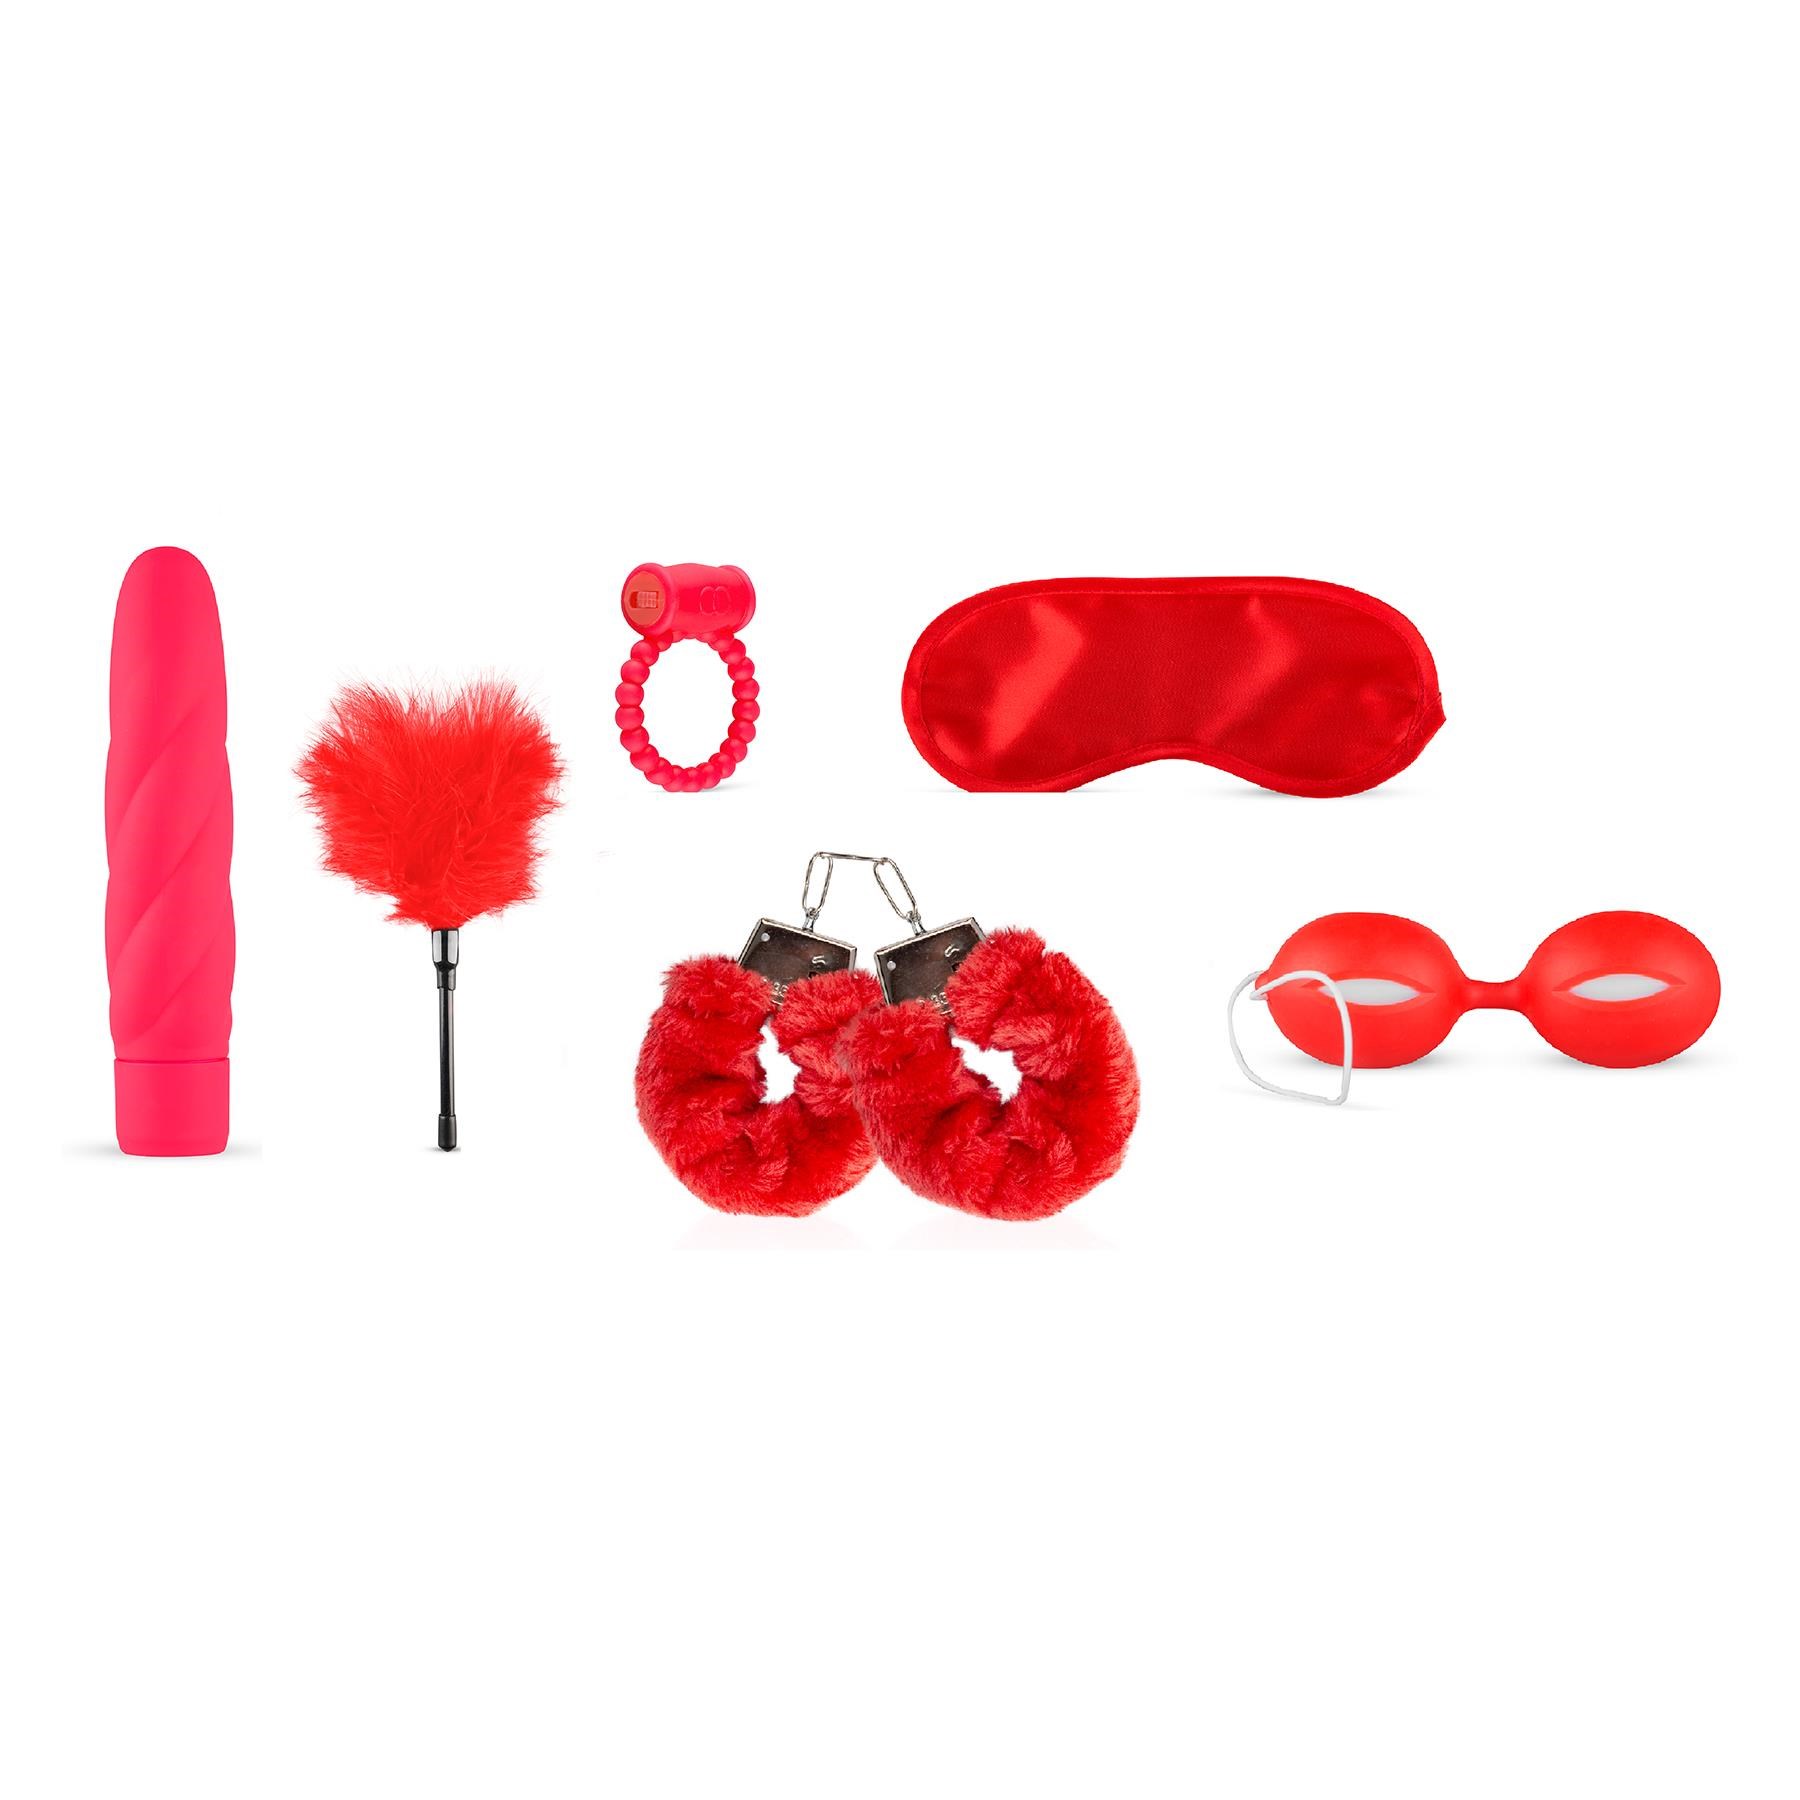 I Love Red Gift Set - All Components